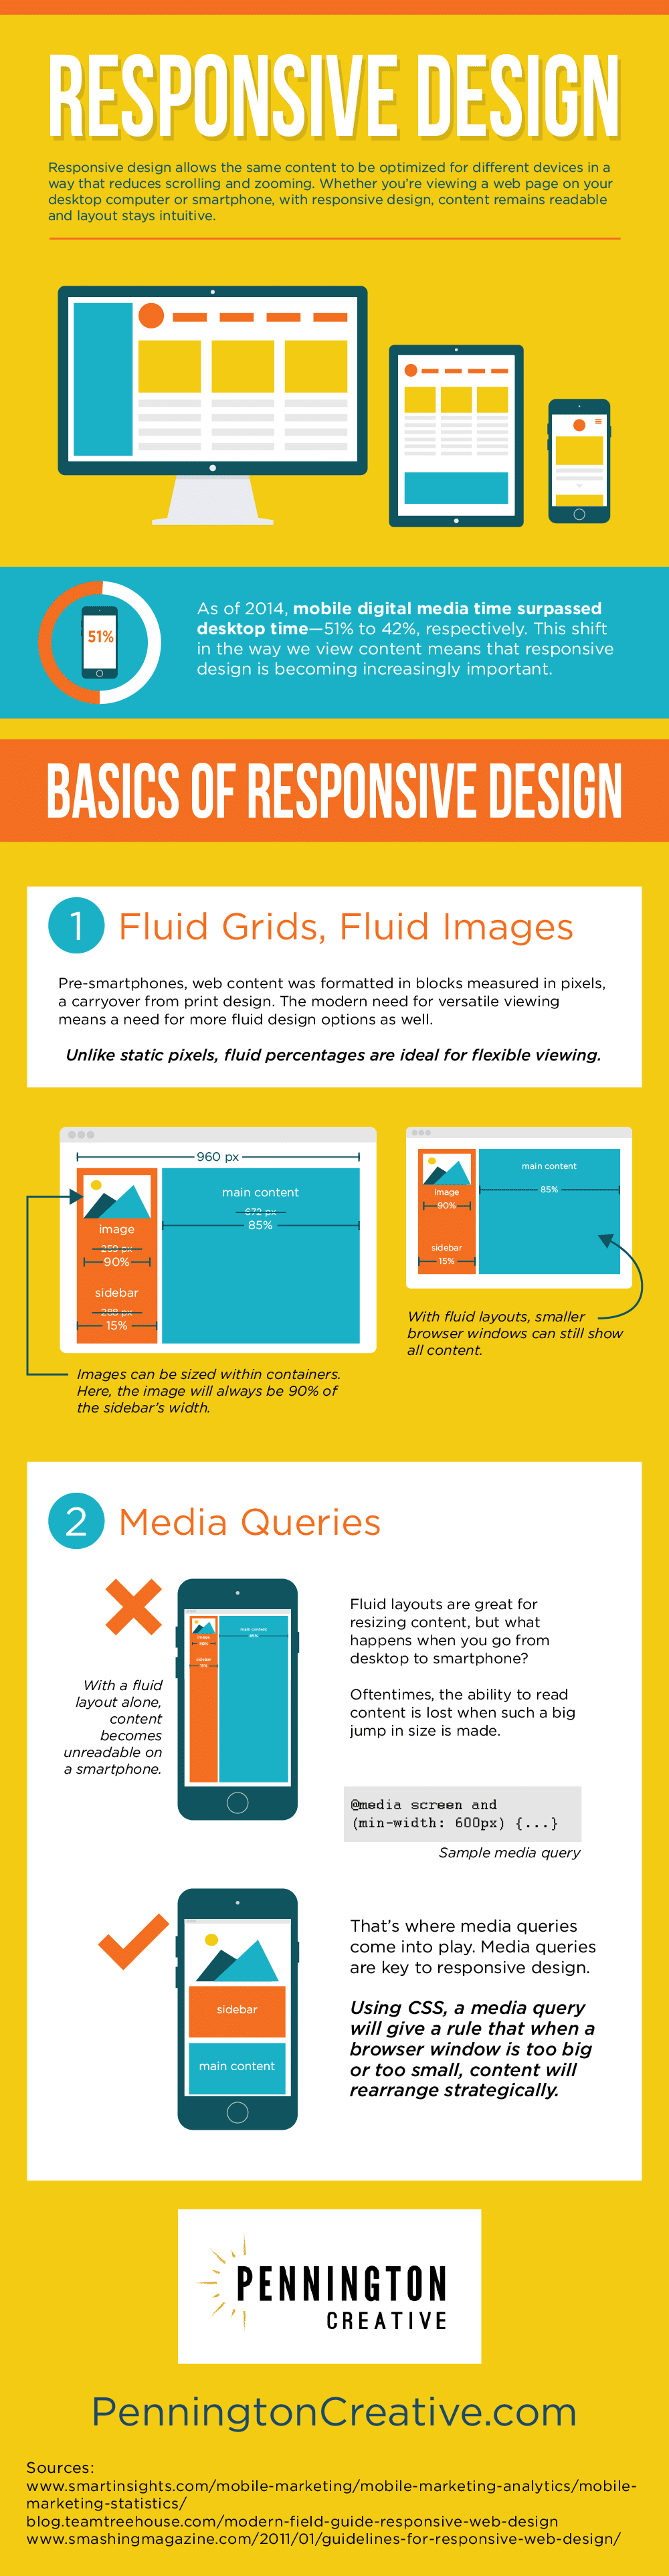 Reponsive Design Infographic